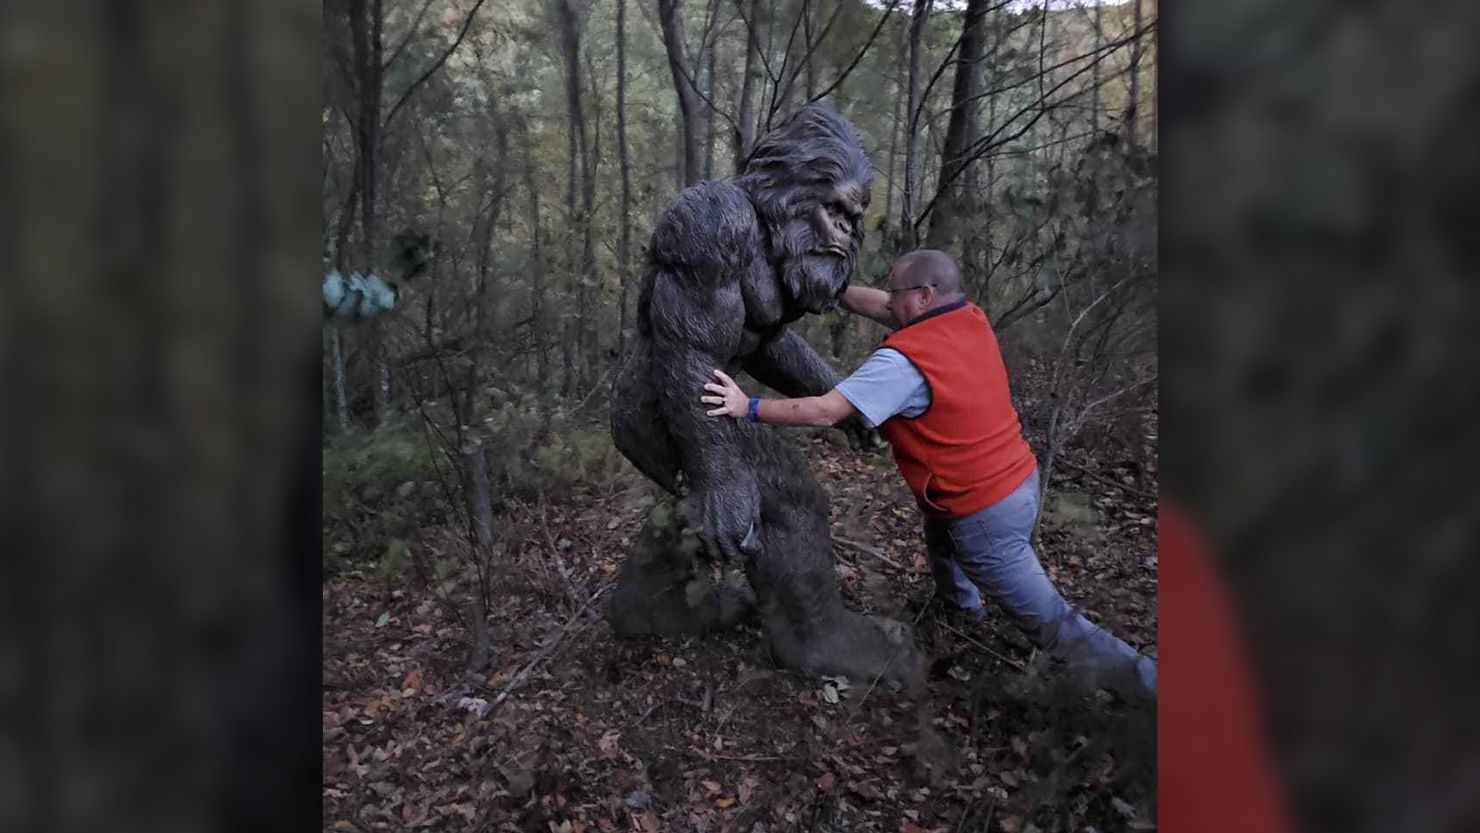 A Bigfoot statue was missing for months, but it was just found in the woods. 